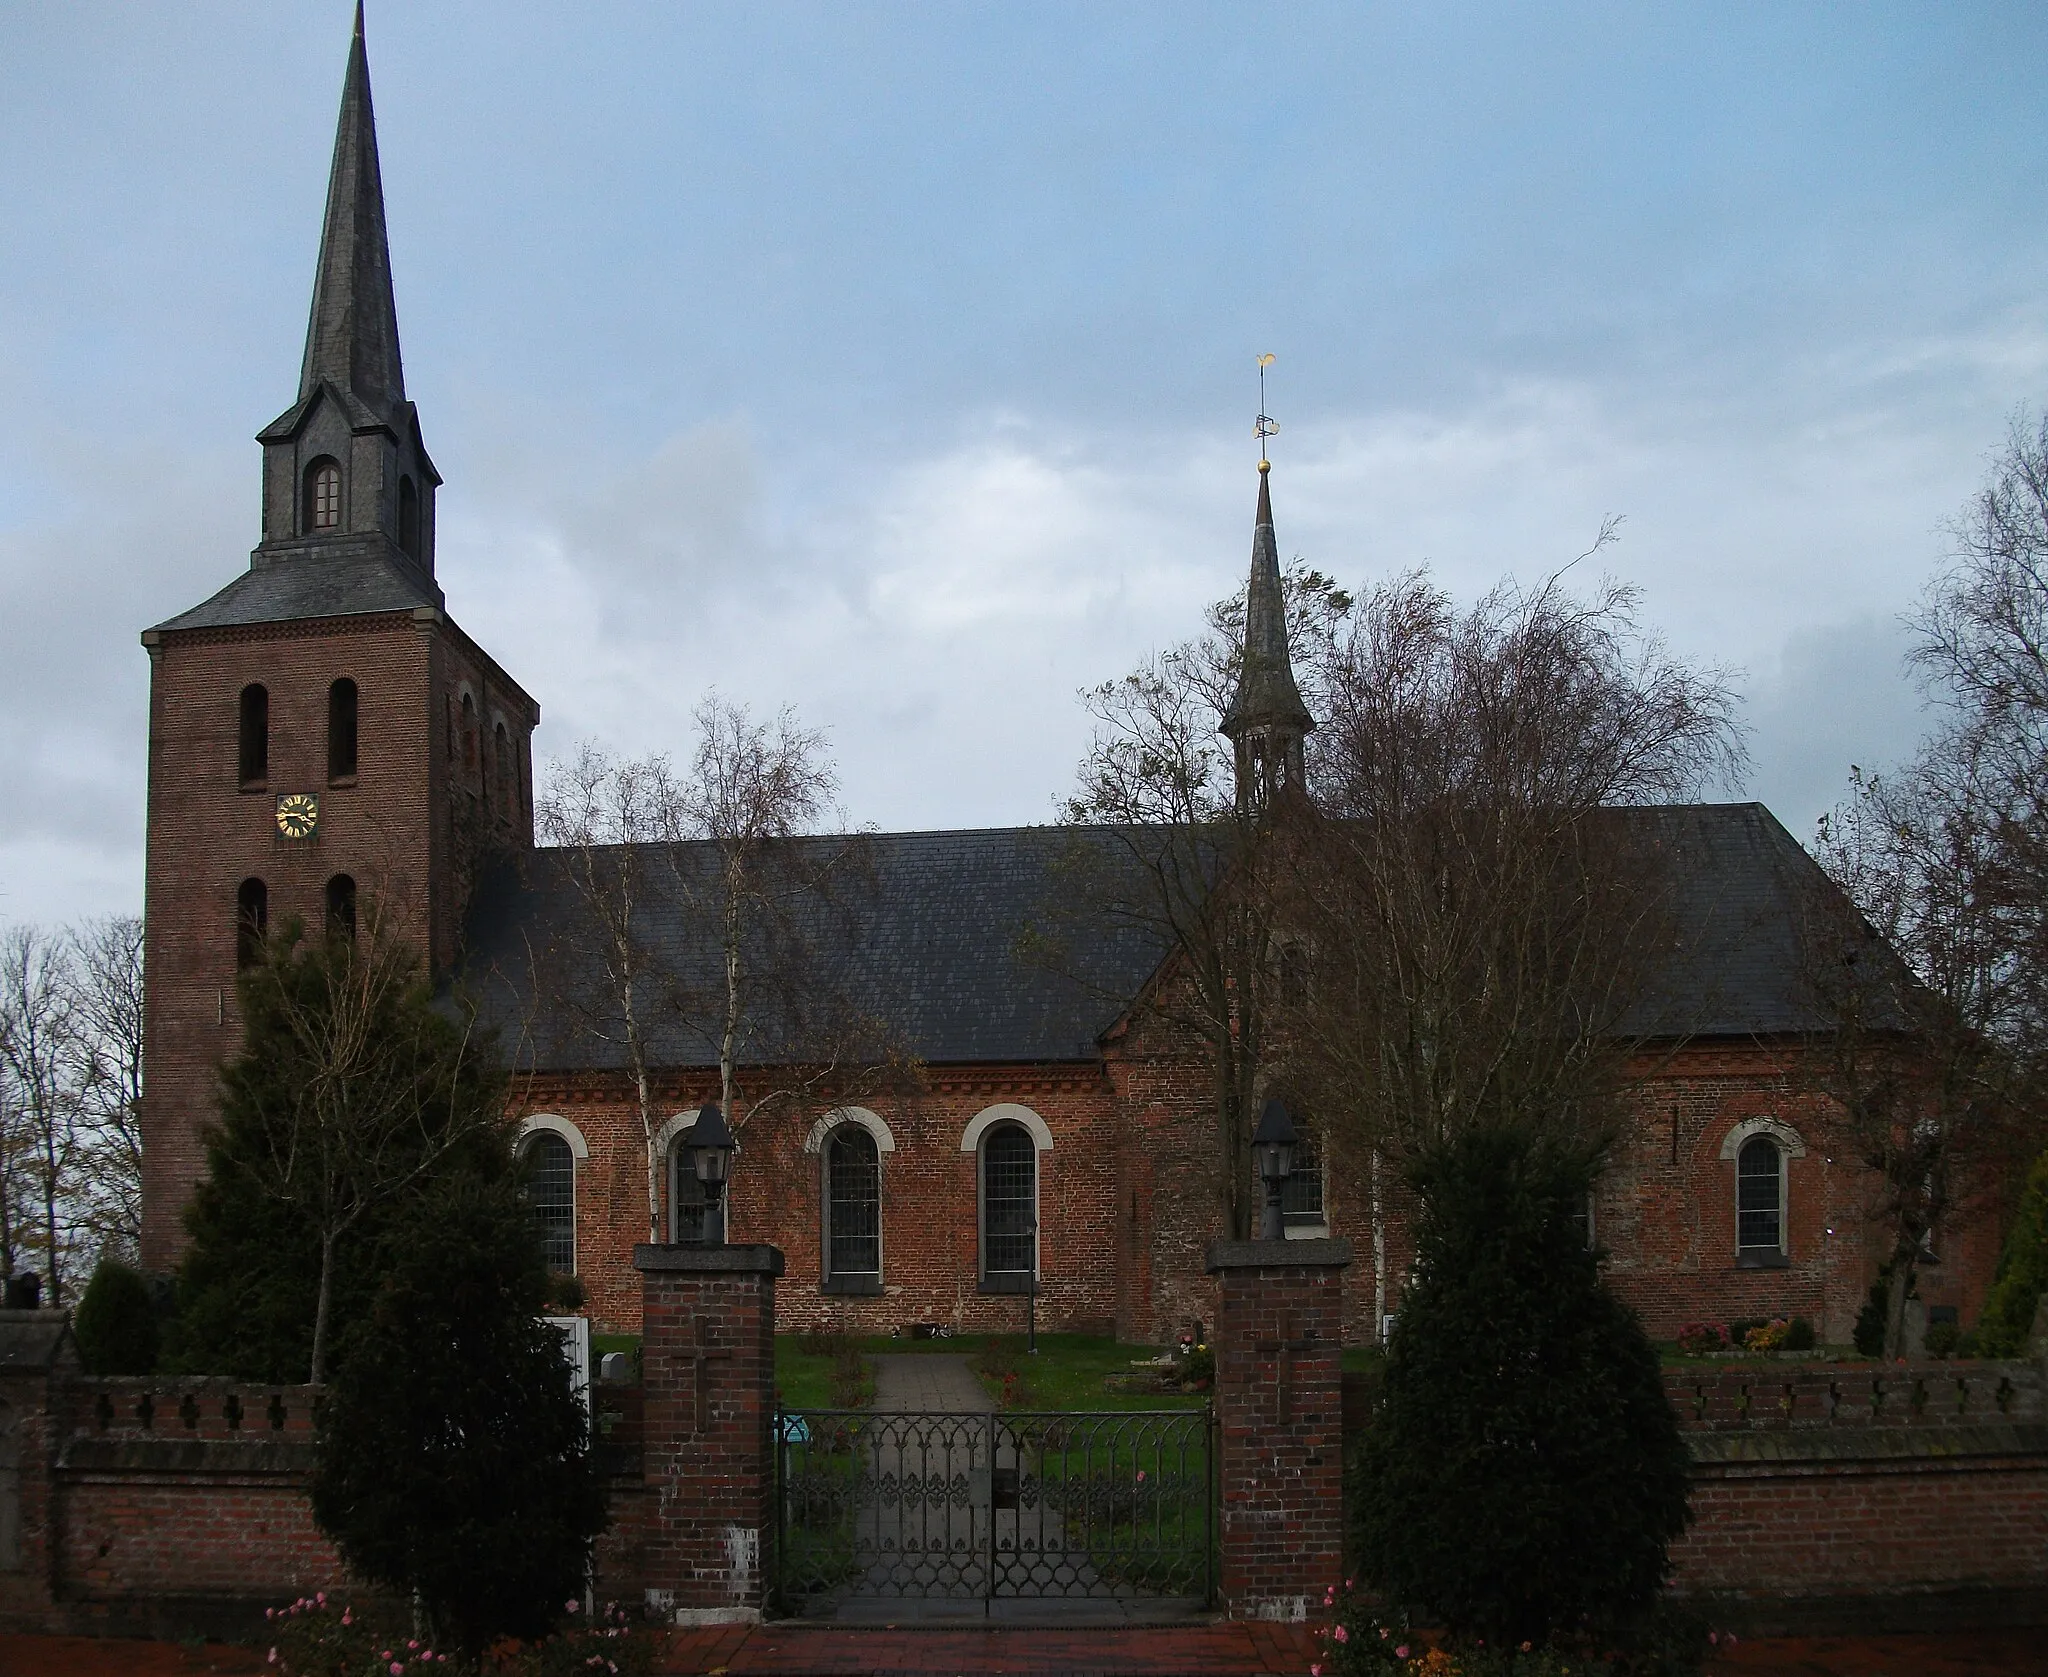 Photo showing: The Church St. Pankratius in Oldenswort.